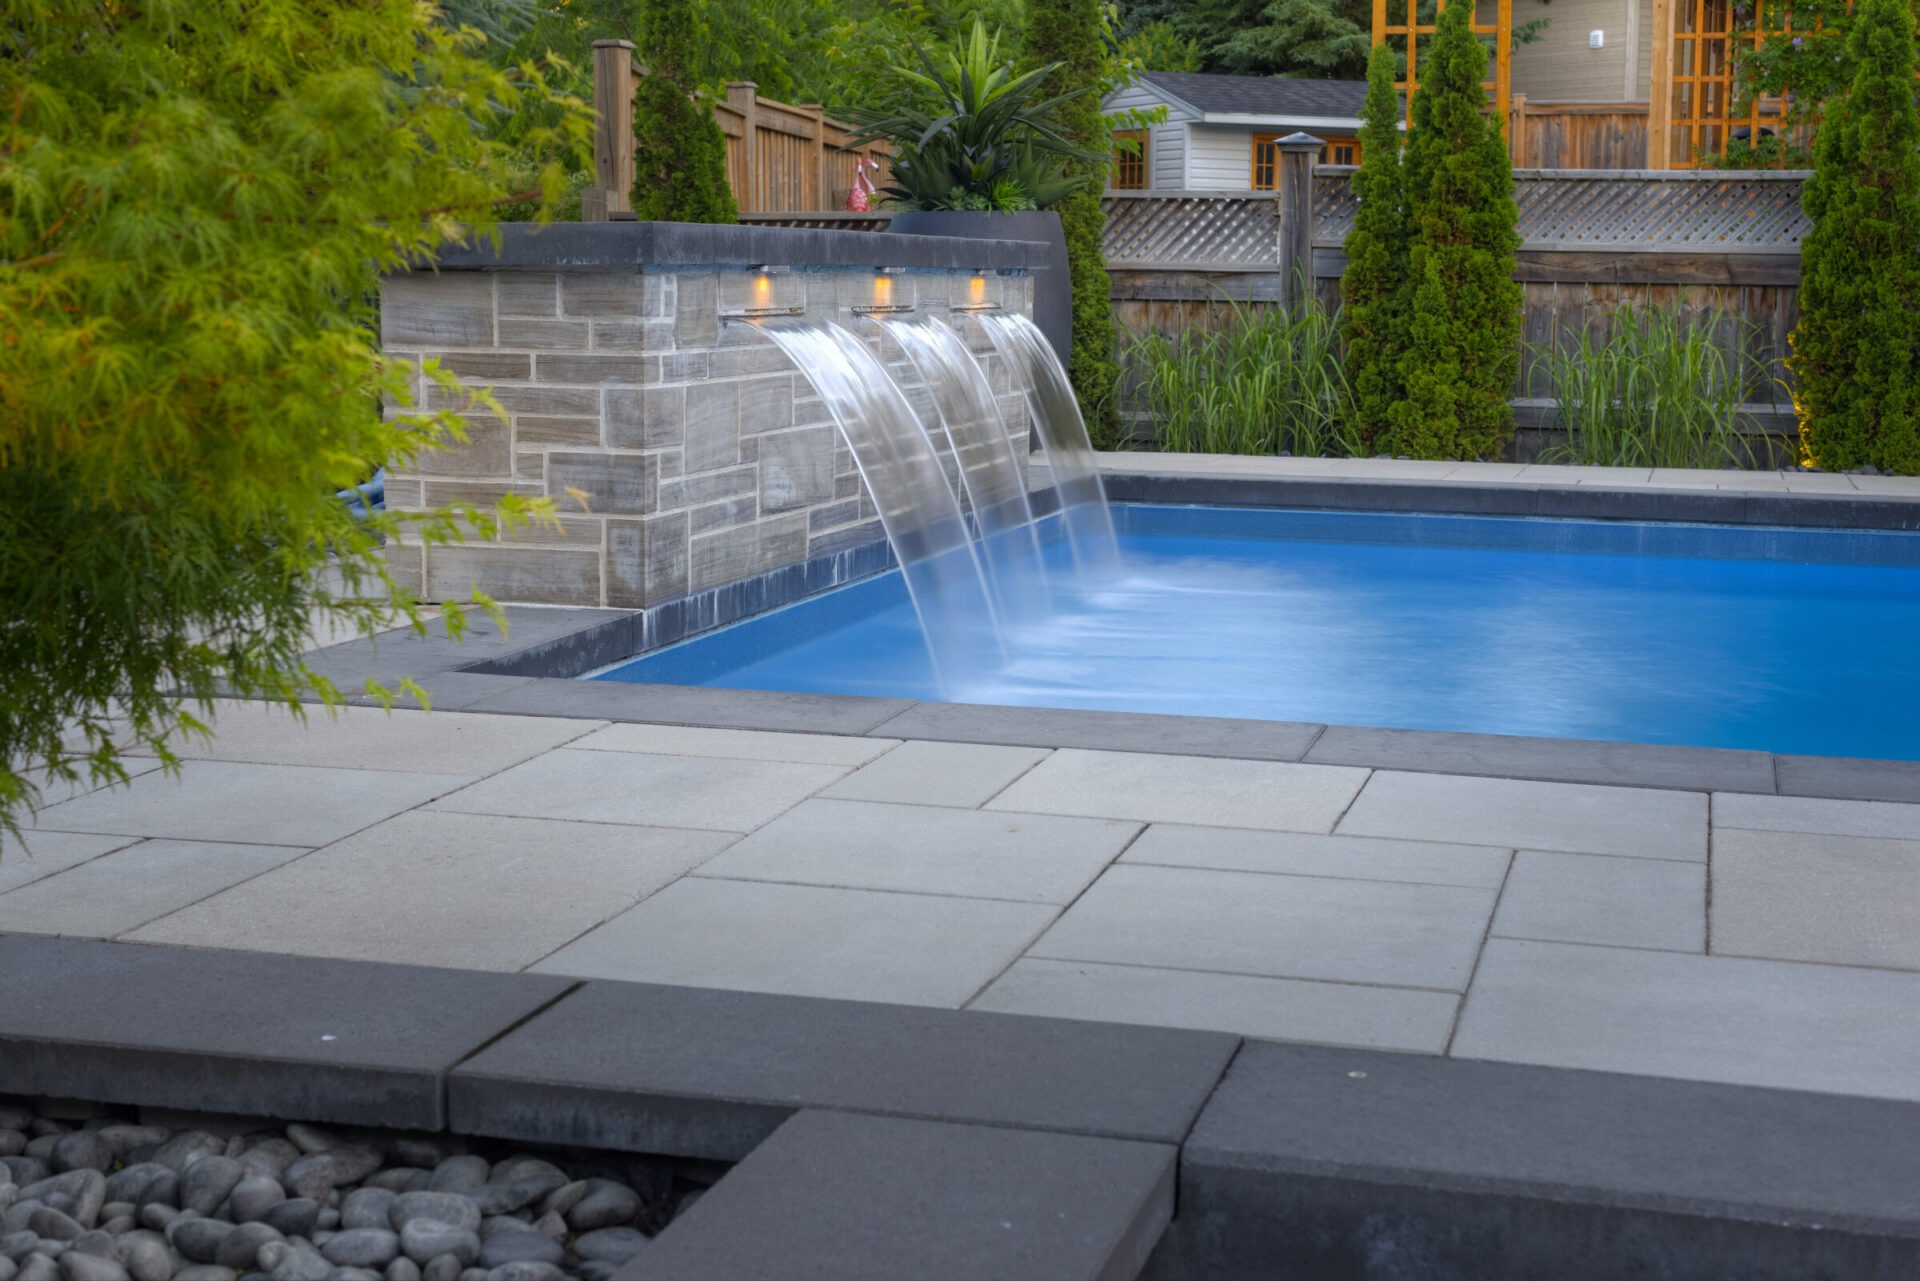 An elegantly landscaped backyard with a pool featuring waterfalls and lights. Paved stones and decorative rocks outline the tranquil space during dusk.